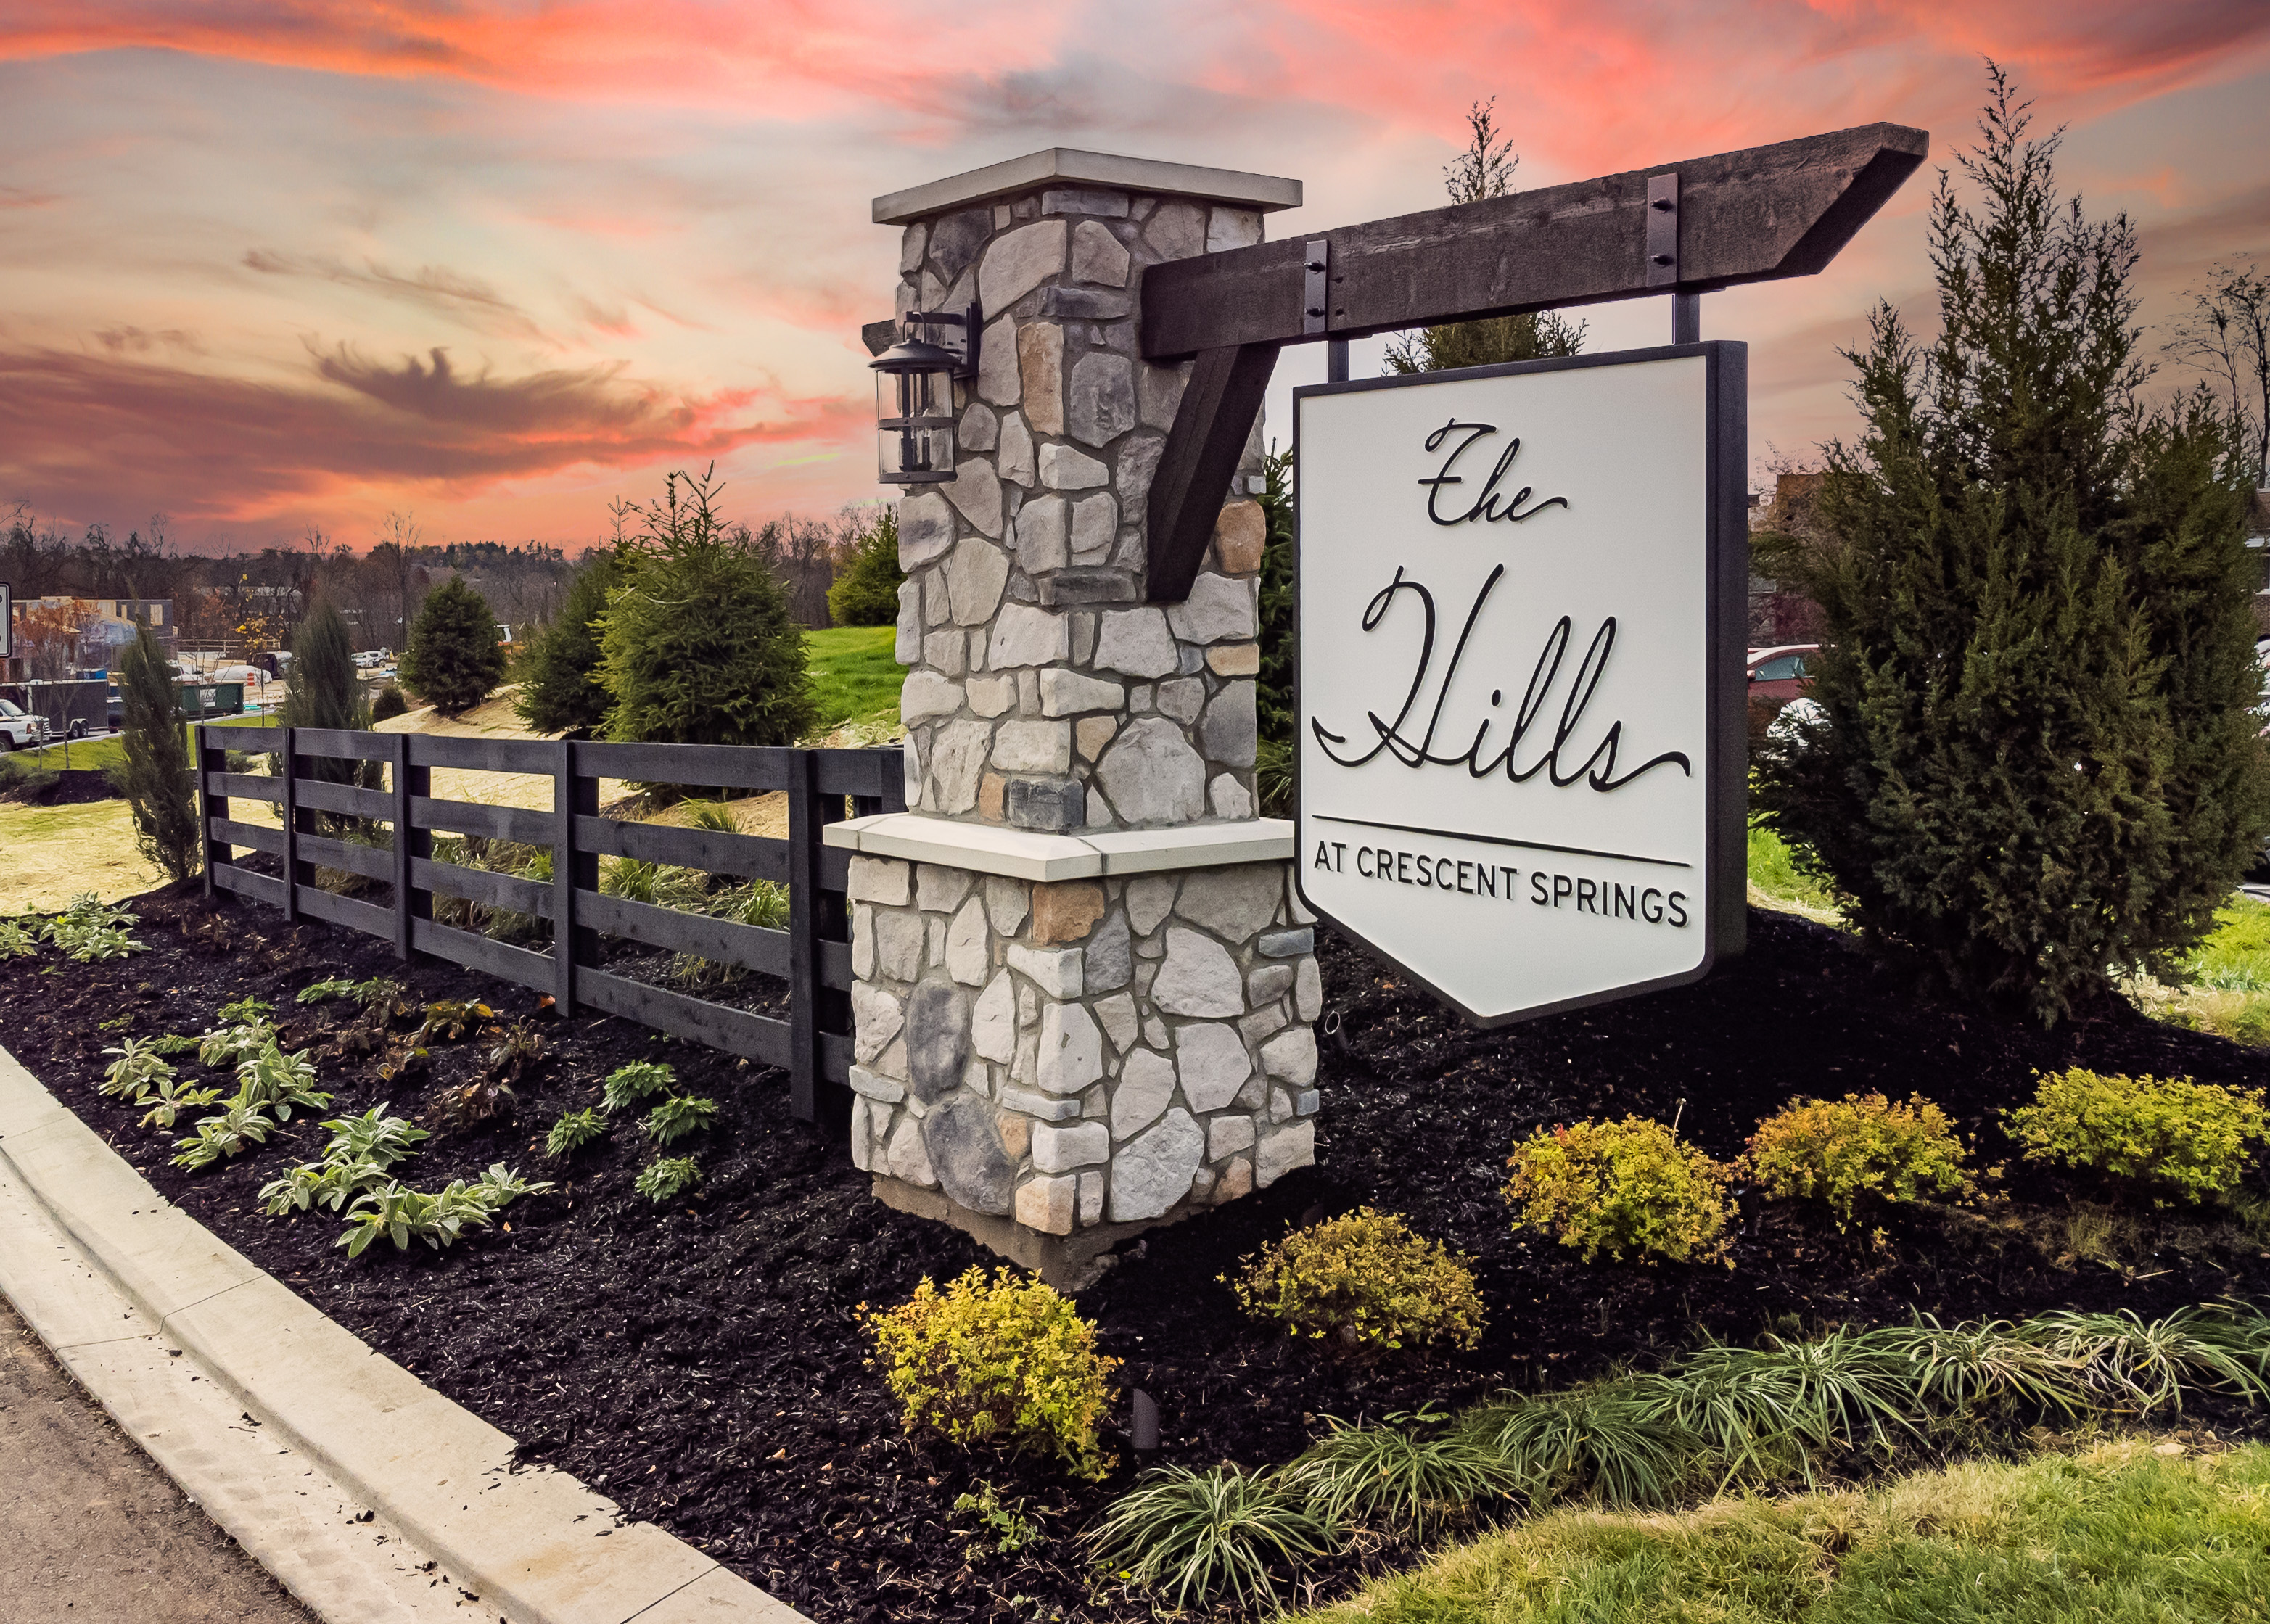 The Hills at Crescent Springs features our Gallery II Condominiums, featuring seven open-concept floorplans ranging from one to two bedrooms with two bathrooms, as well as providing no-step options. 